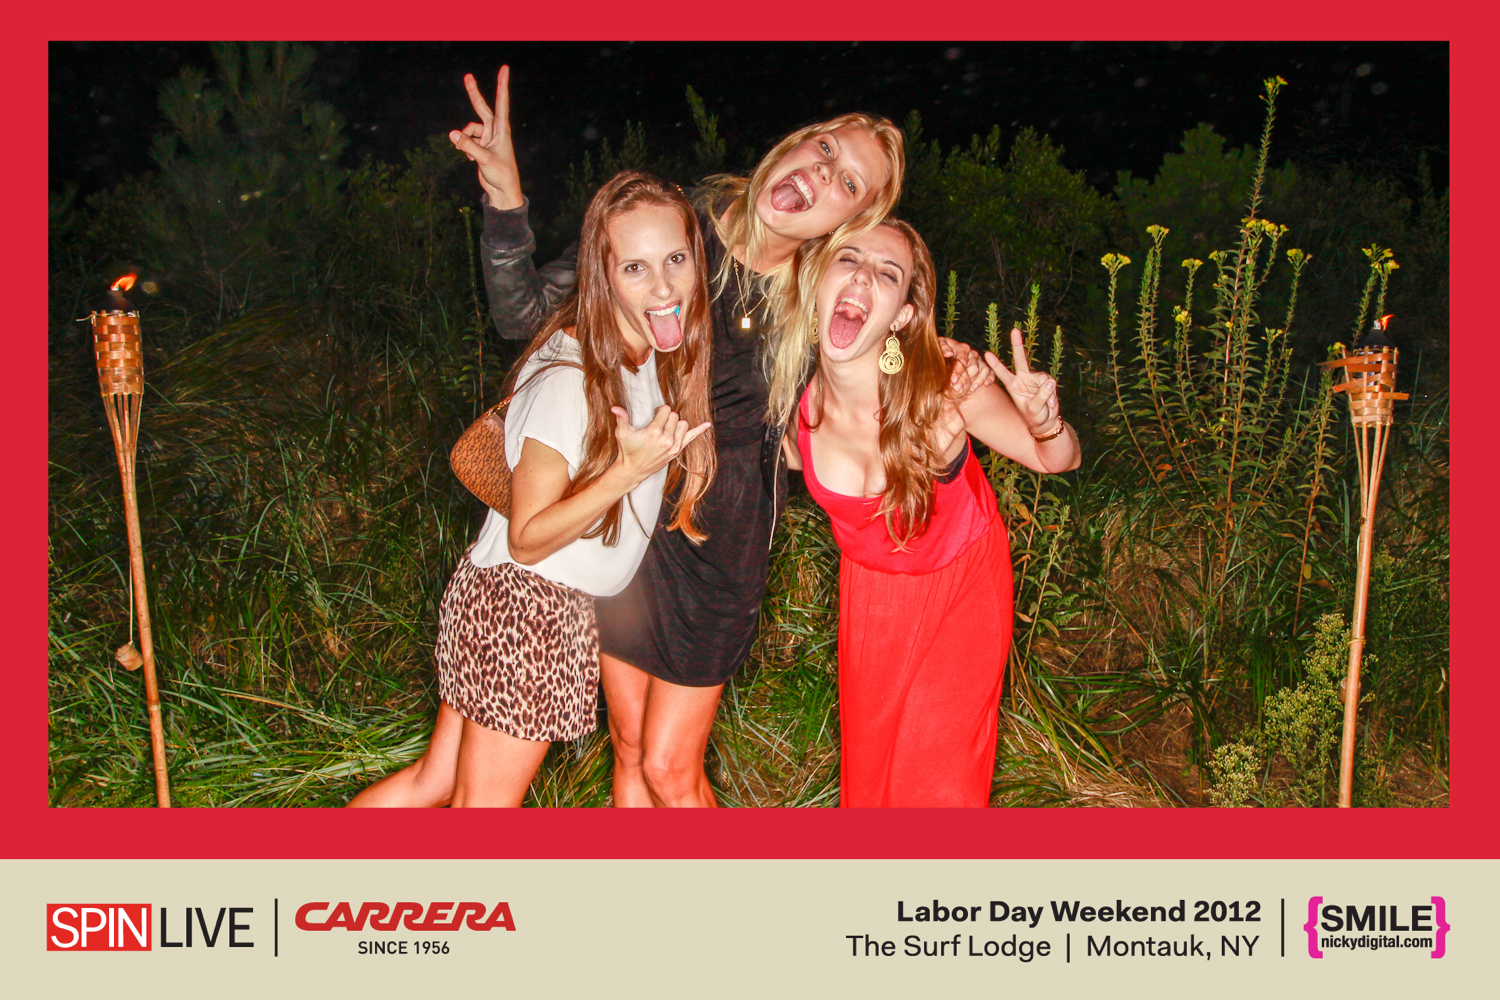 SPIN Live X Carrera Labor Day Weekend Photo Booth at The Surf Lodge August 31 – September 3, 2012!